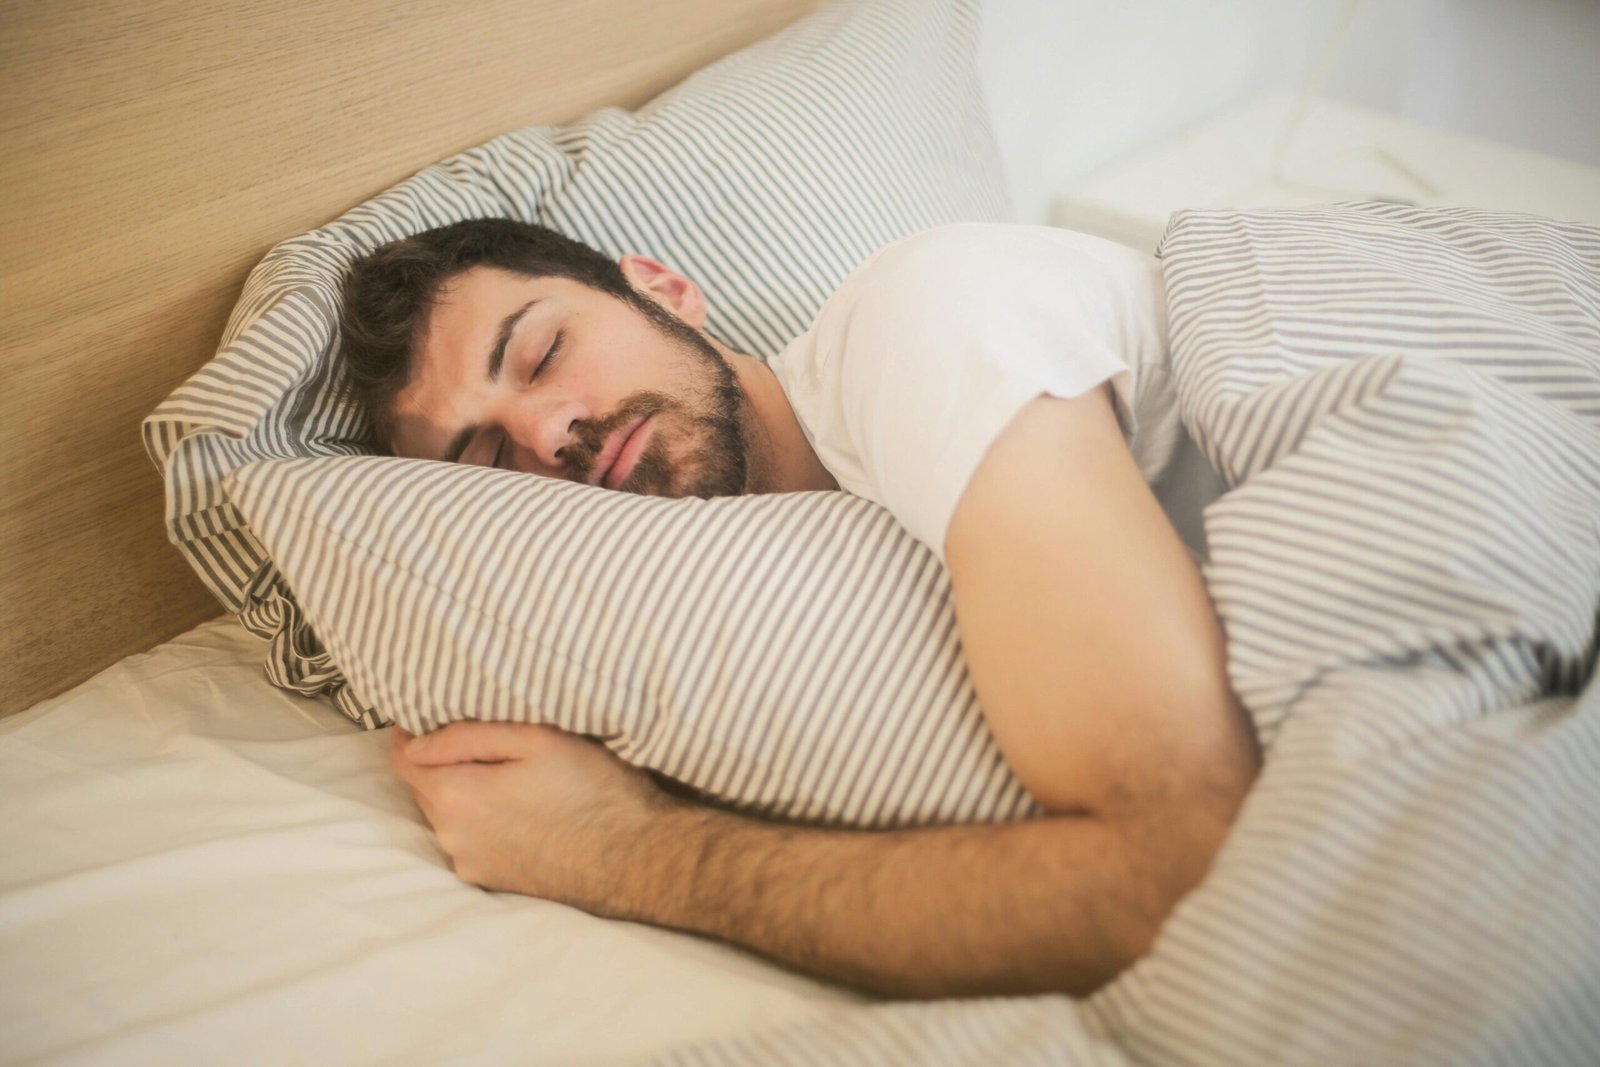 Adequate sleep important for your heart health says physician